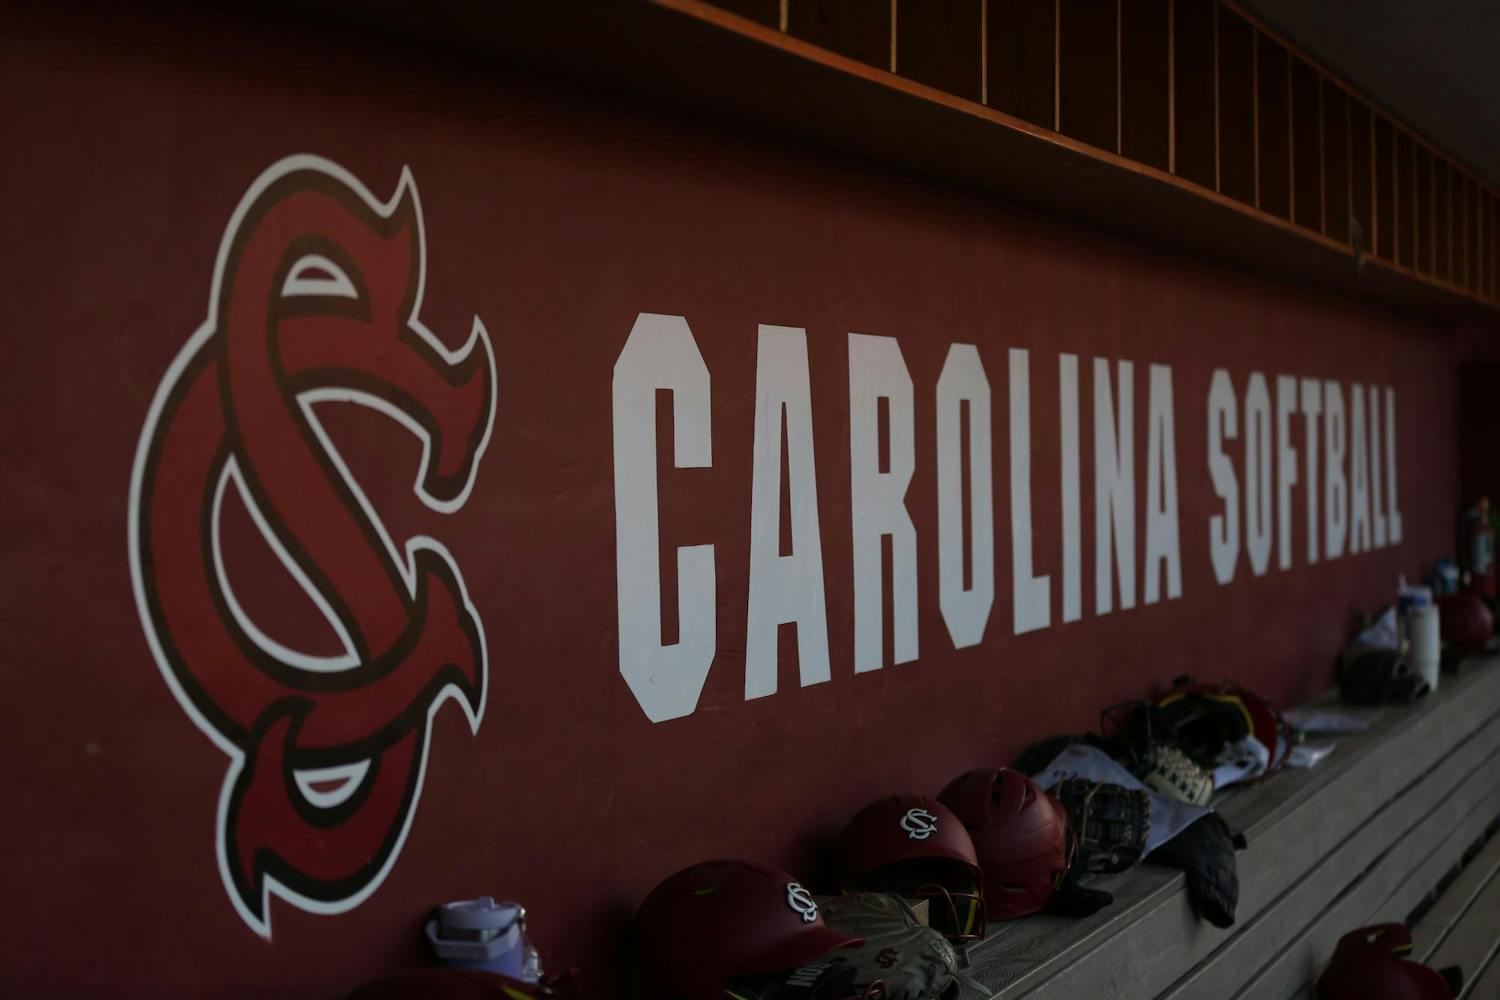 The University of South Carolina softball logo is seen underneath one of the dugouts during South Carolina's matchup against Massachusetts at Beckham Field on Feb. 24, 2024. The Gamecocks finished its season 36-24.